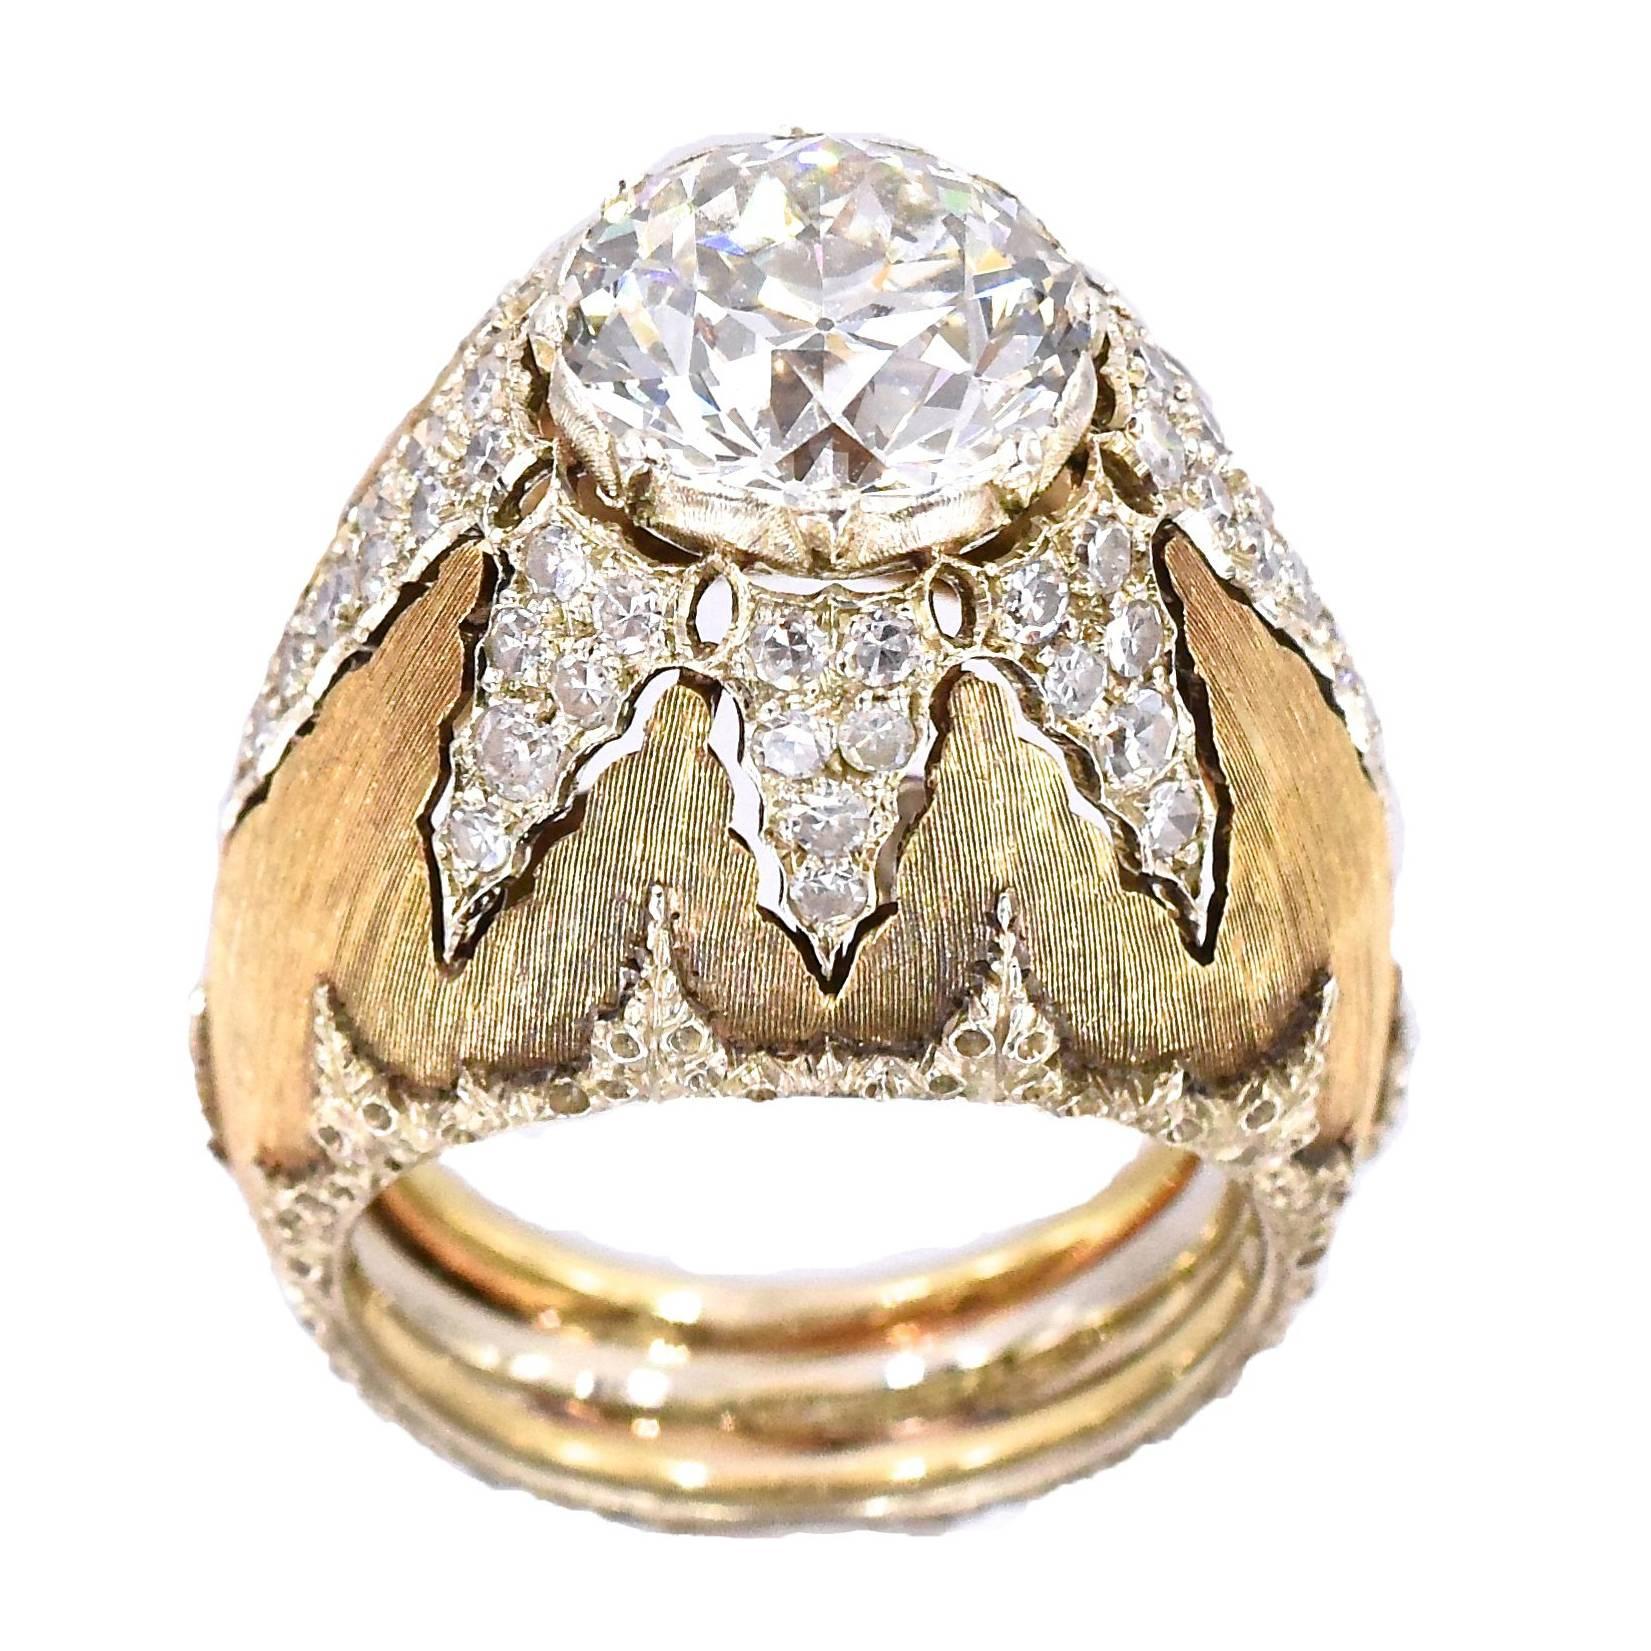 Buccellati Rings For Sale Cheap Sale, SAVE 48% - mpgc.net